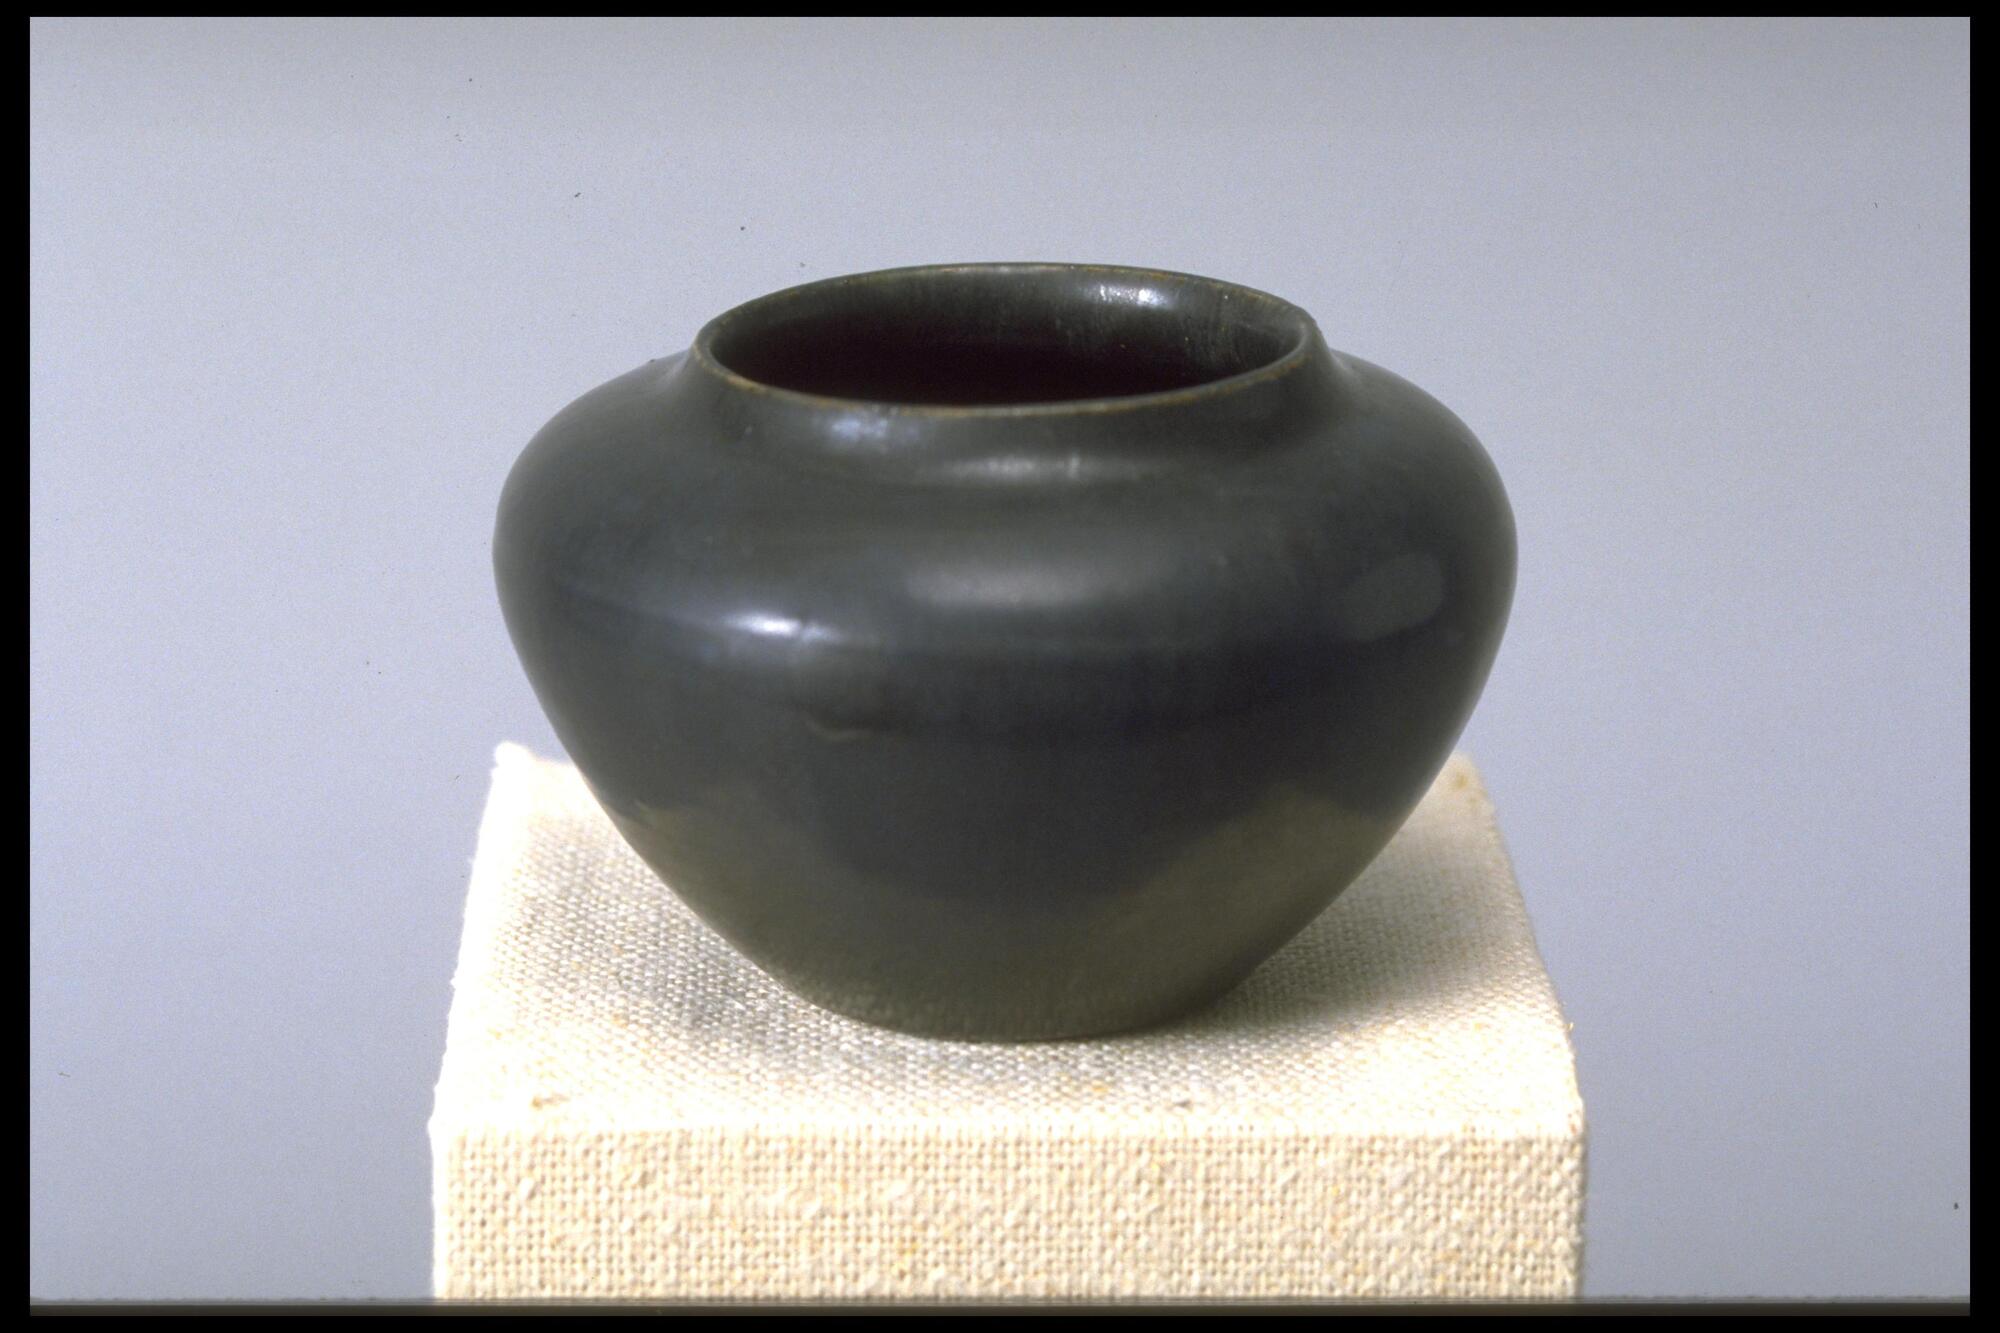 Ceramic vessel with wide mouth and rounded shoulder covered in a dark blue-gray mat glaze